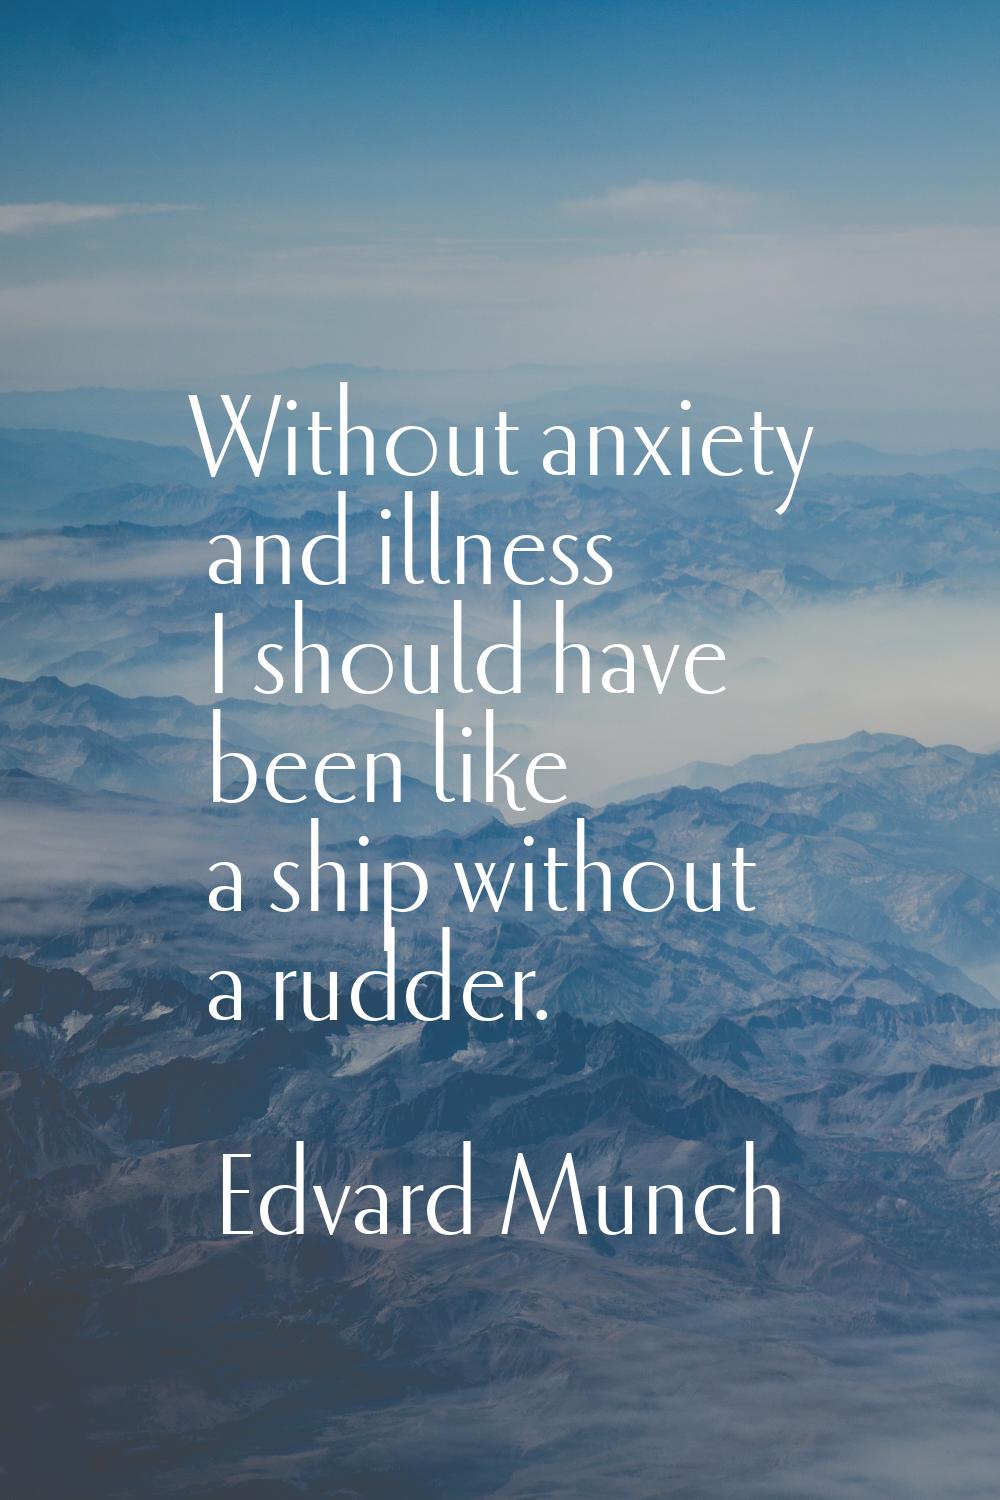 Without anxiety and illness I should have been like a ship without a rudder.